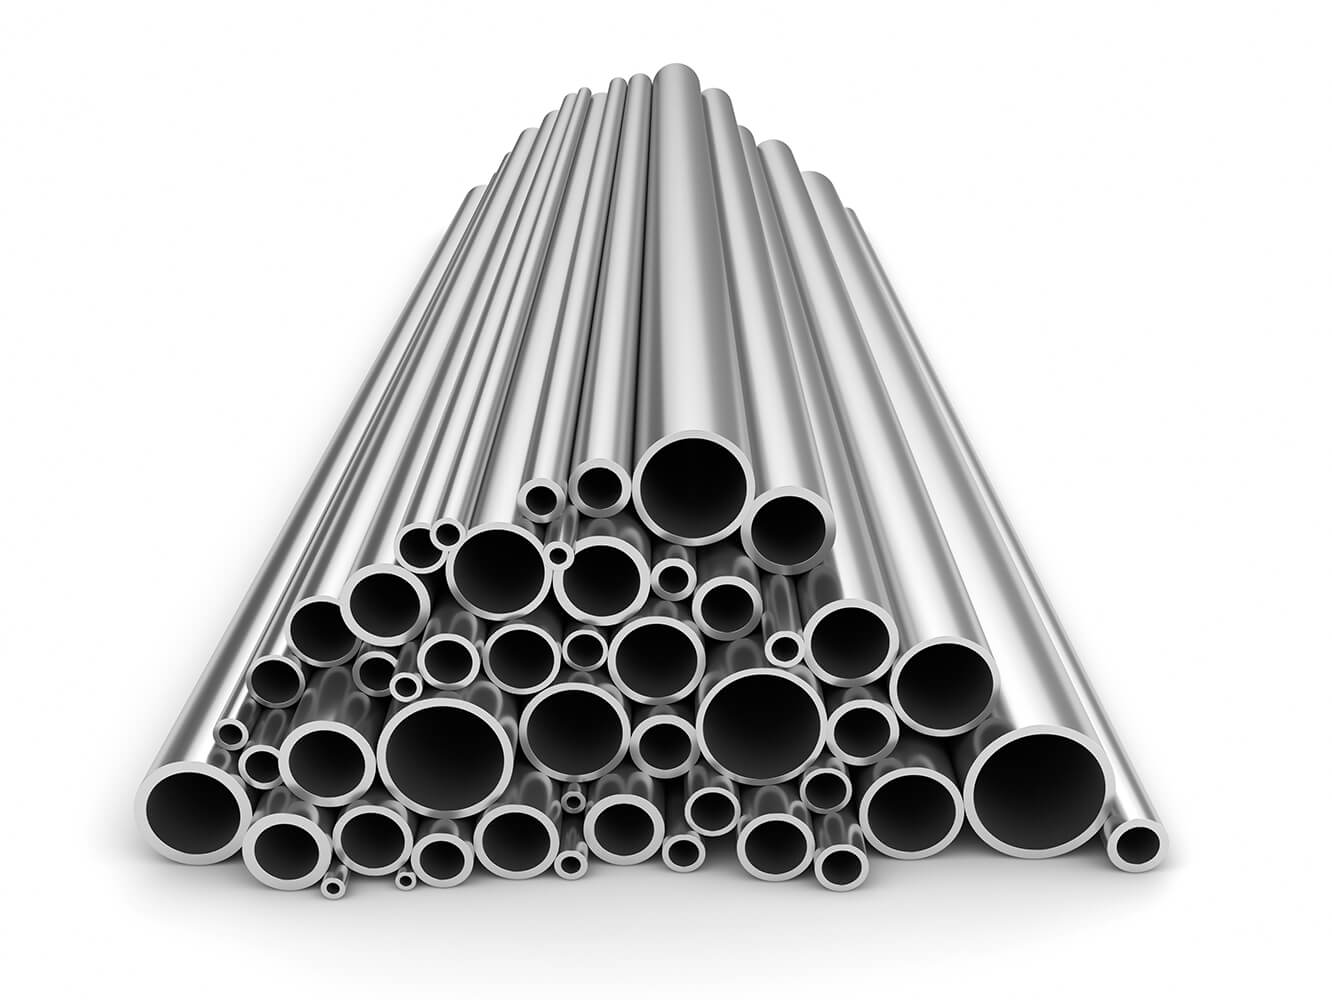 Range of dimensions for seamless tubes